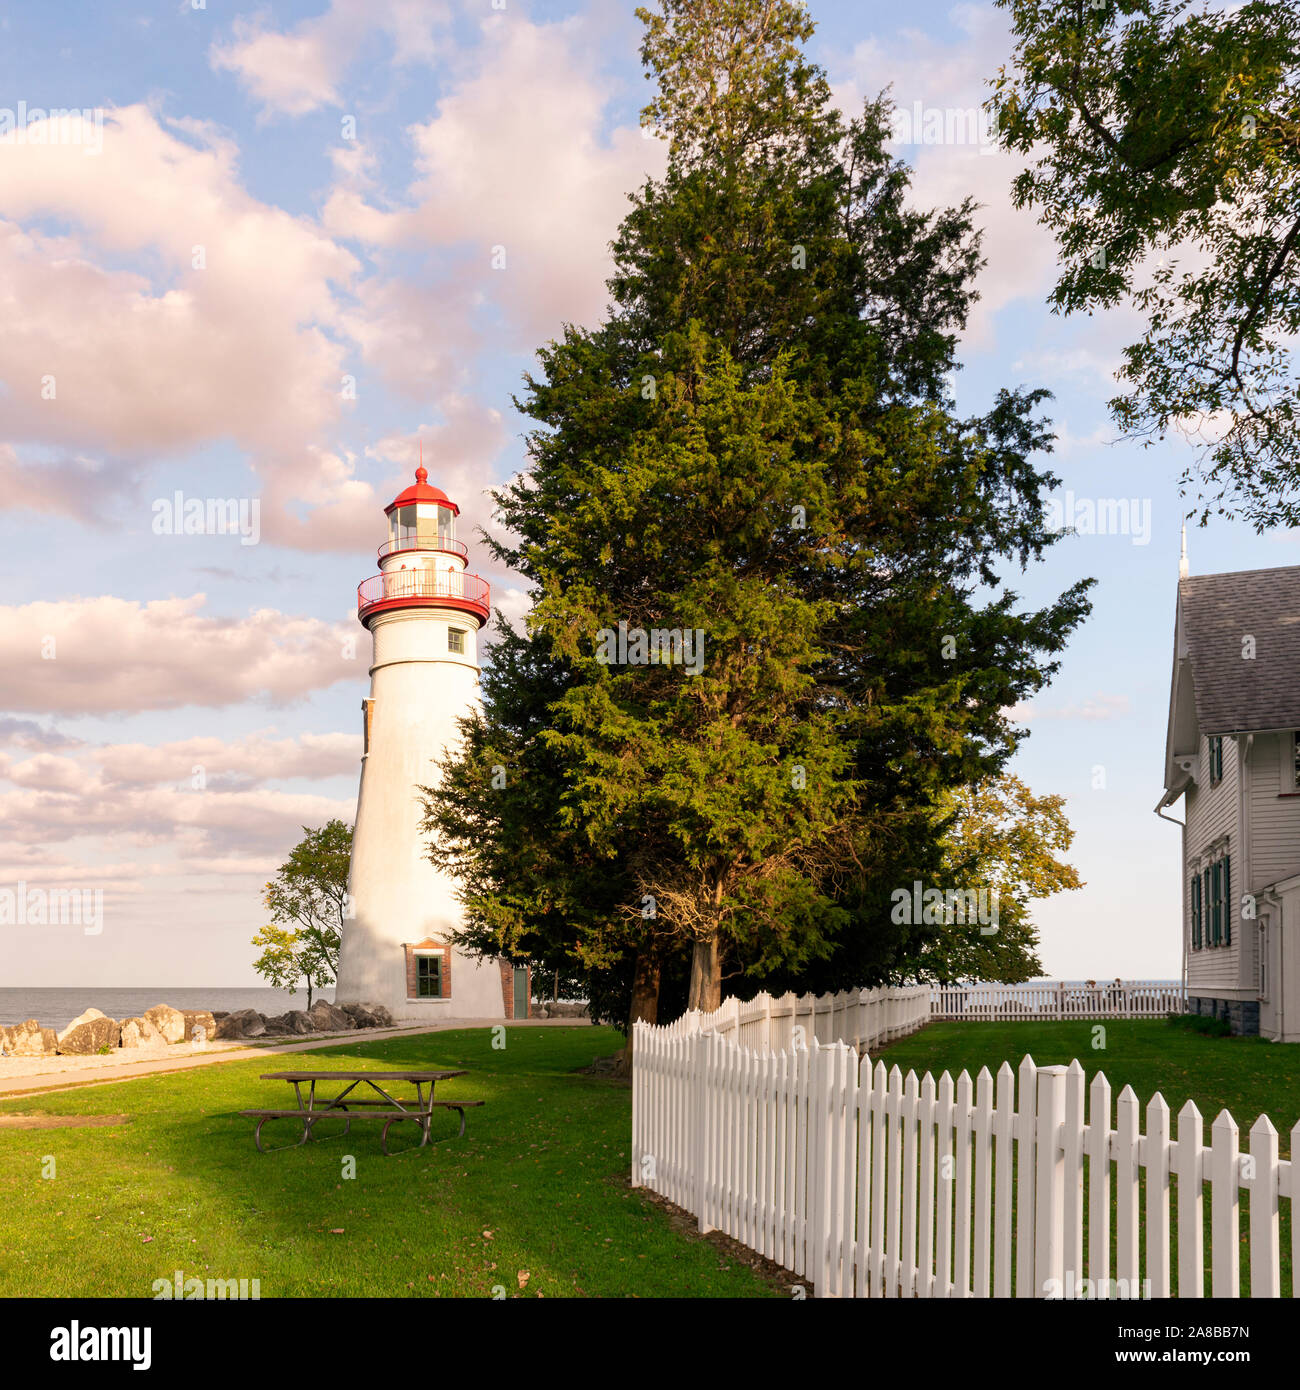 Beautiful twilight view of Marblehead Lighthouse and keeper's house on Lake Erie. Ohio landmark places to see travel and tourism scenic Stock Photo